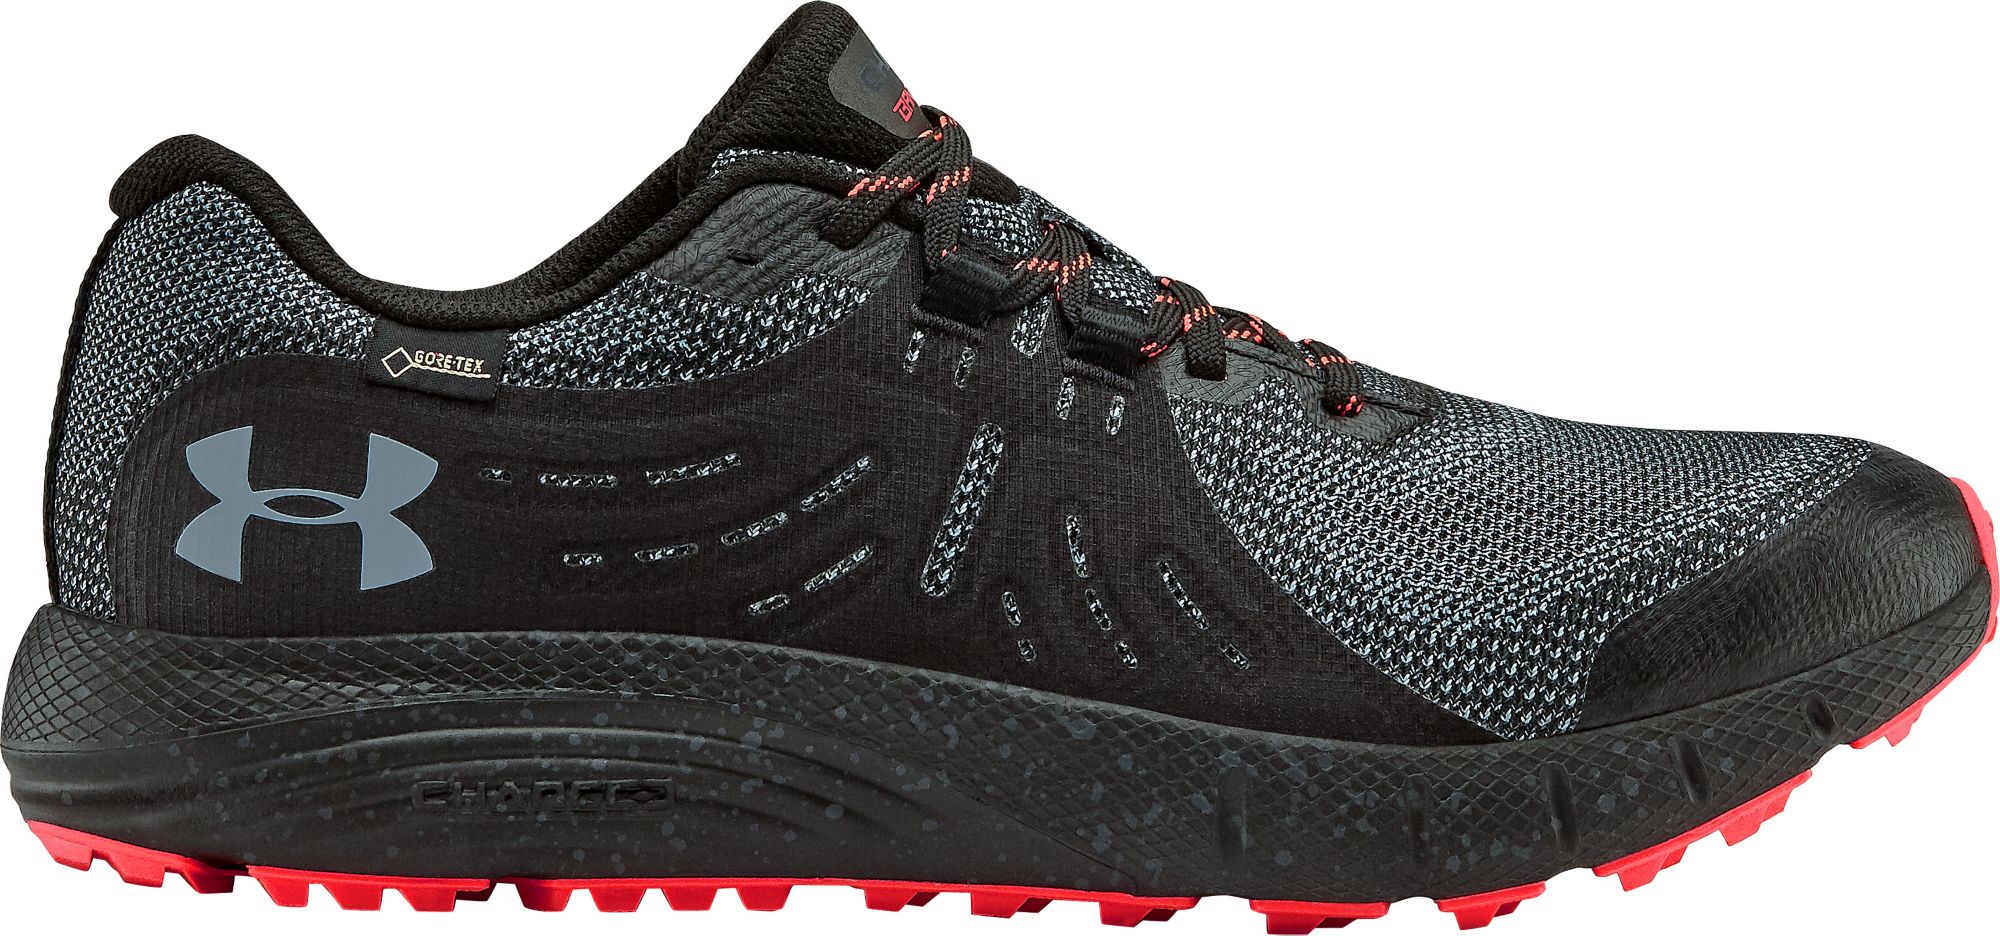 Under Armour Men's Charged Bandit Trail 